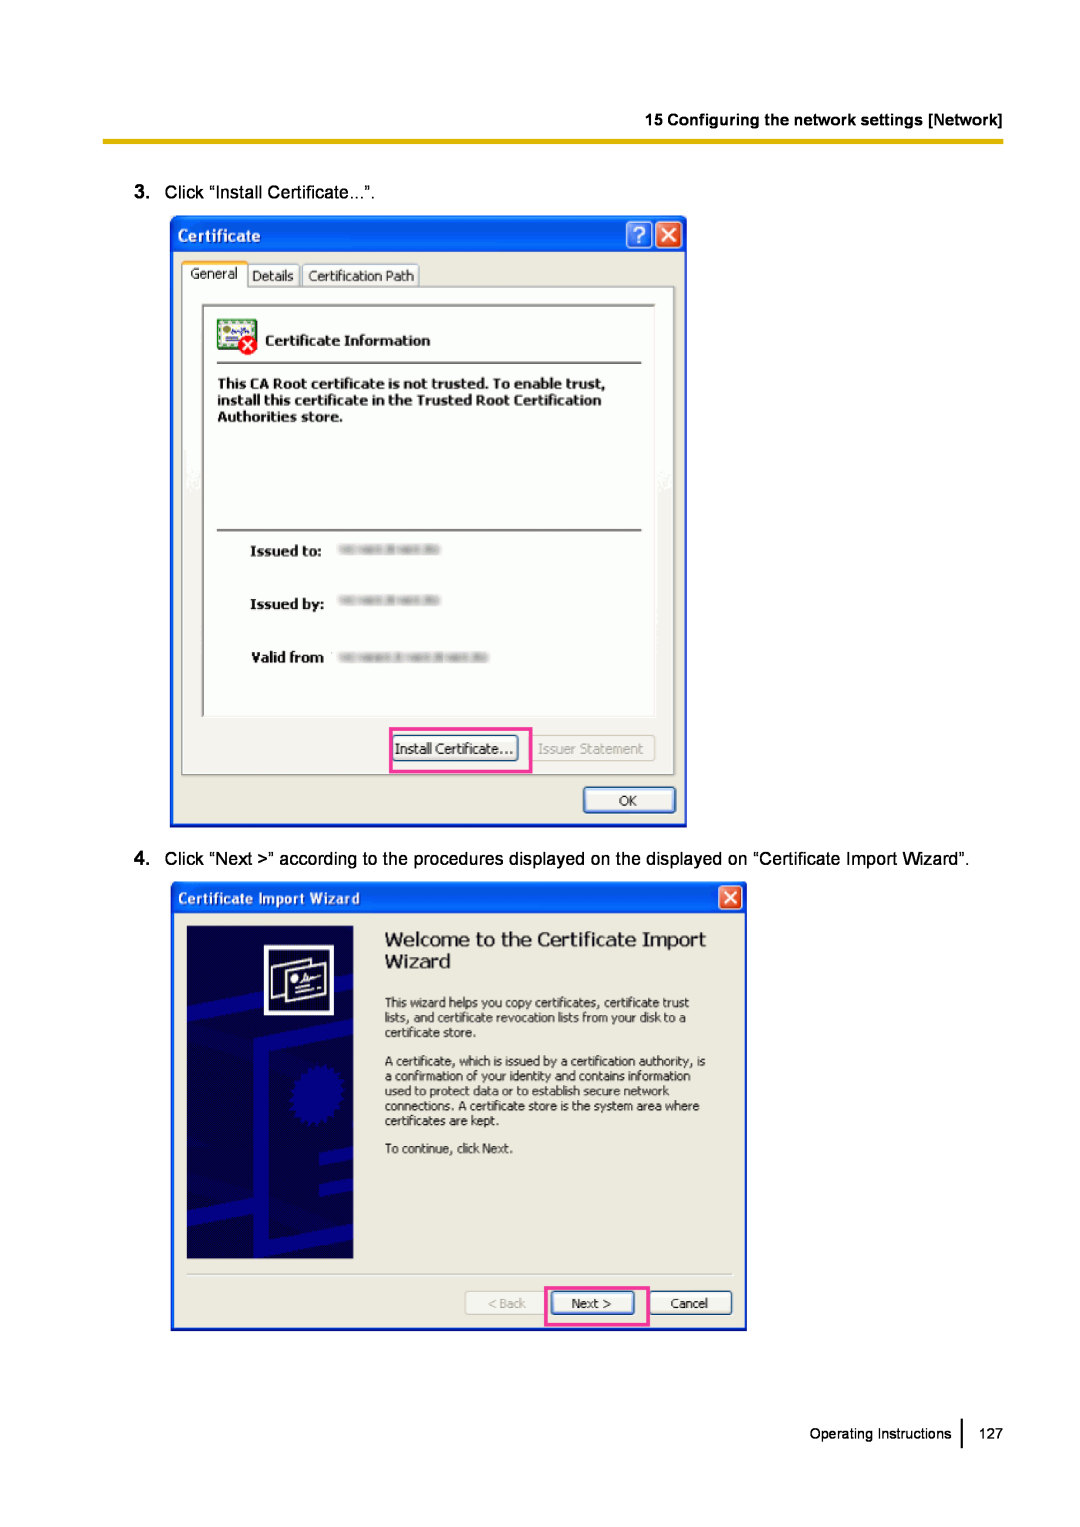 Panasonic BL-VP100 manual Click “Install Certificate...”, Configuring the network settings Network, Operating Instructions 